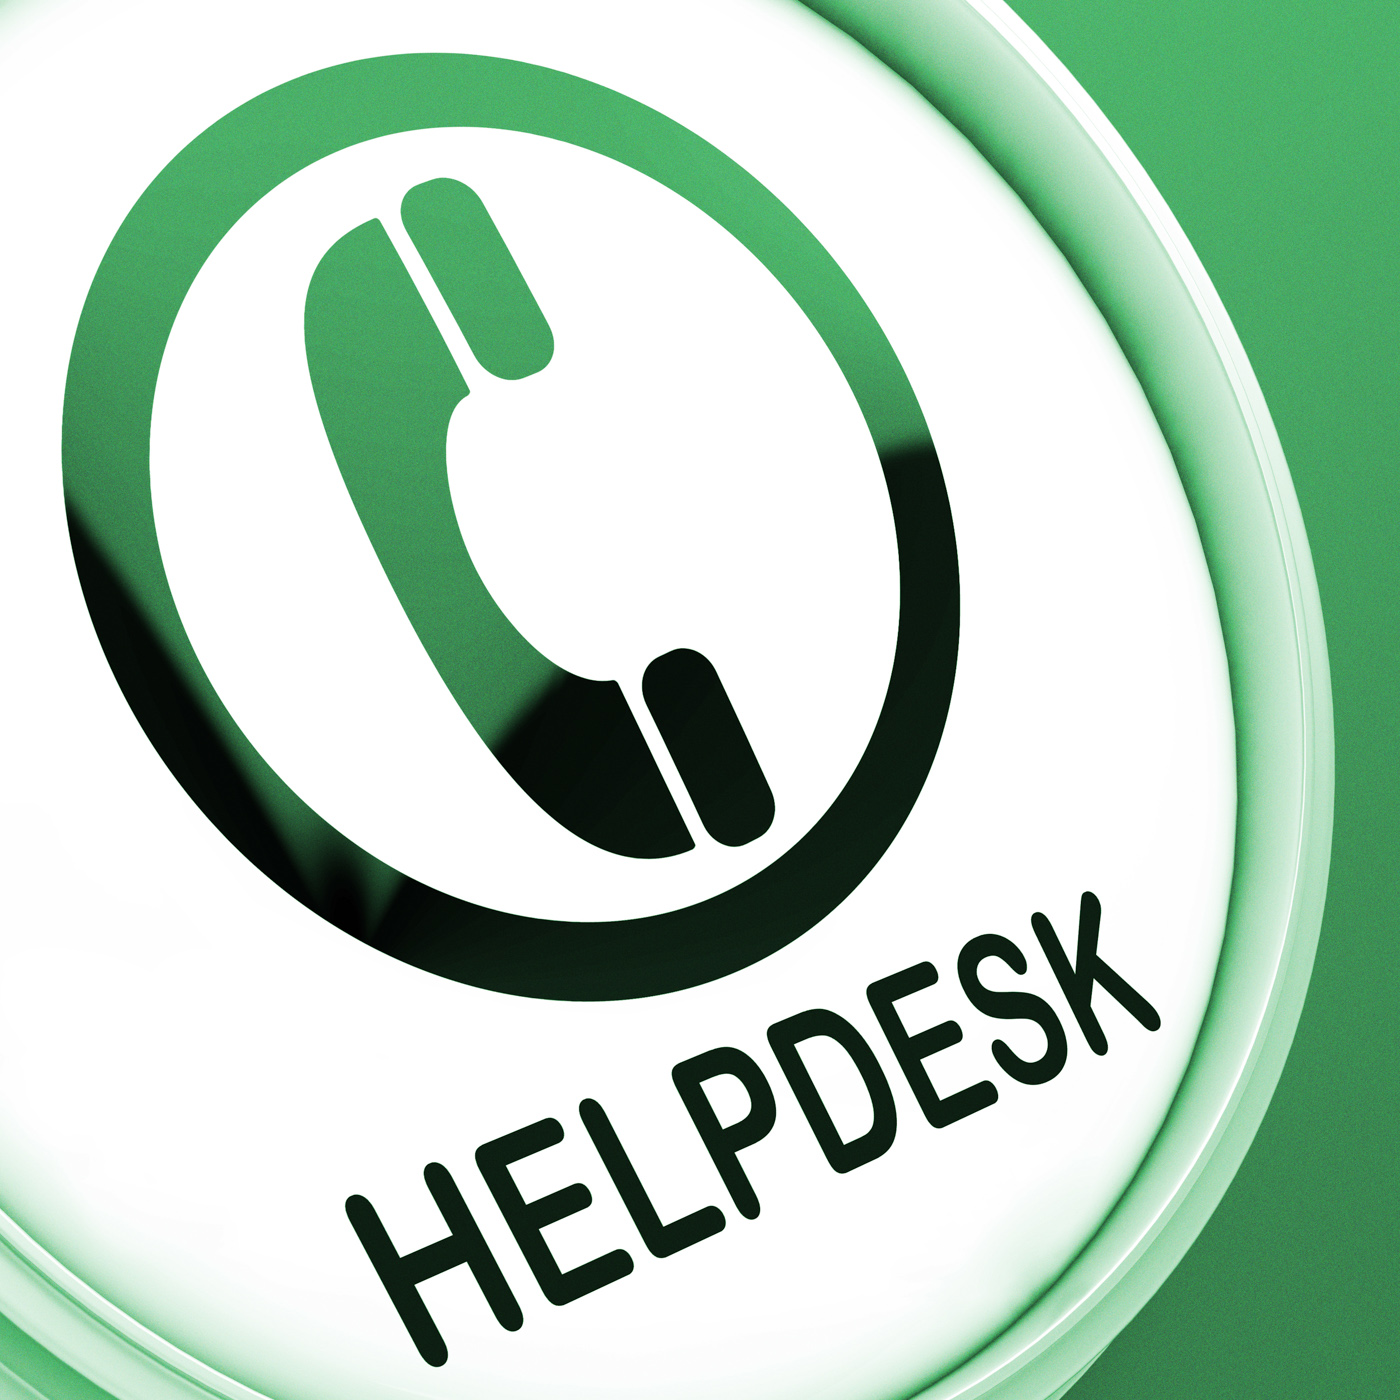 Free Photo Helpdesk Button Shows Call For Advice Advice Inform